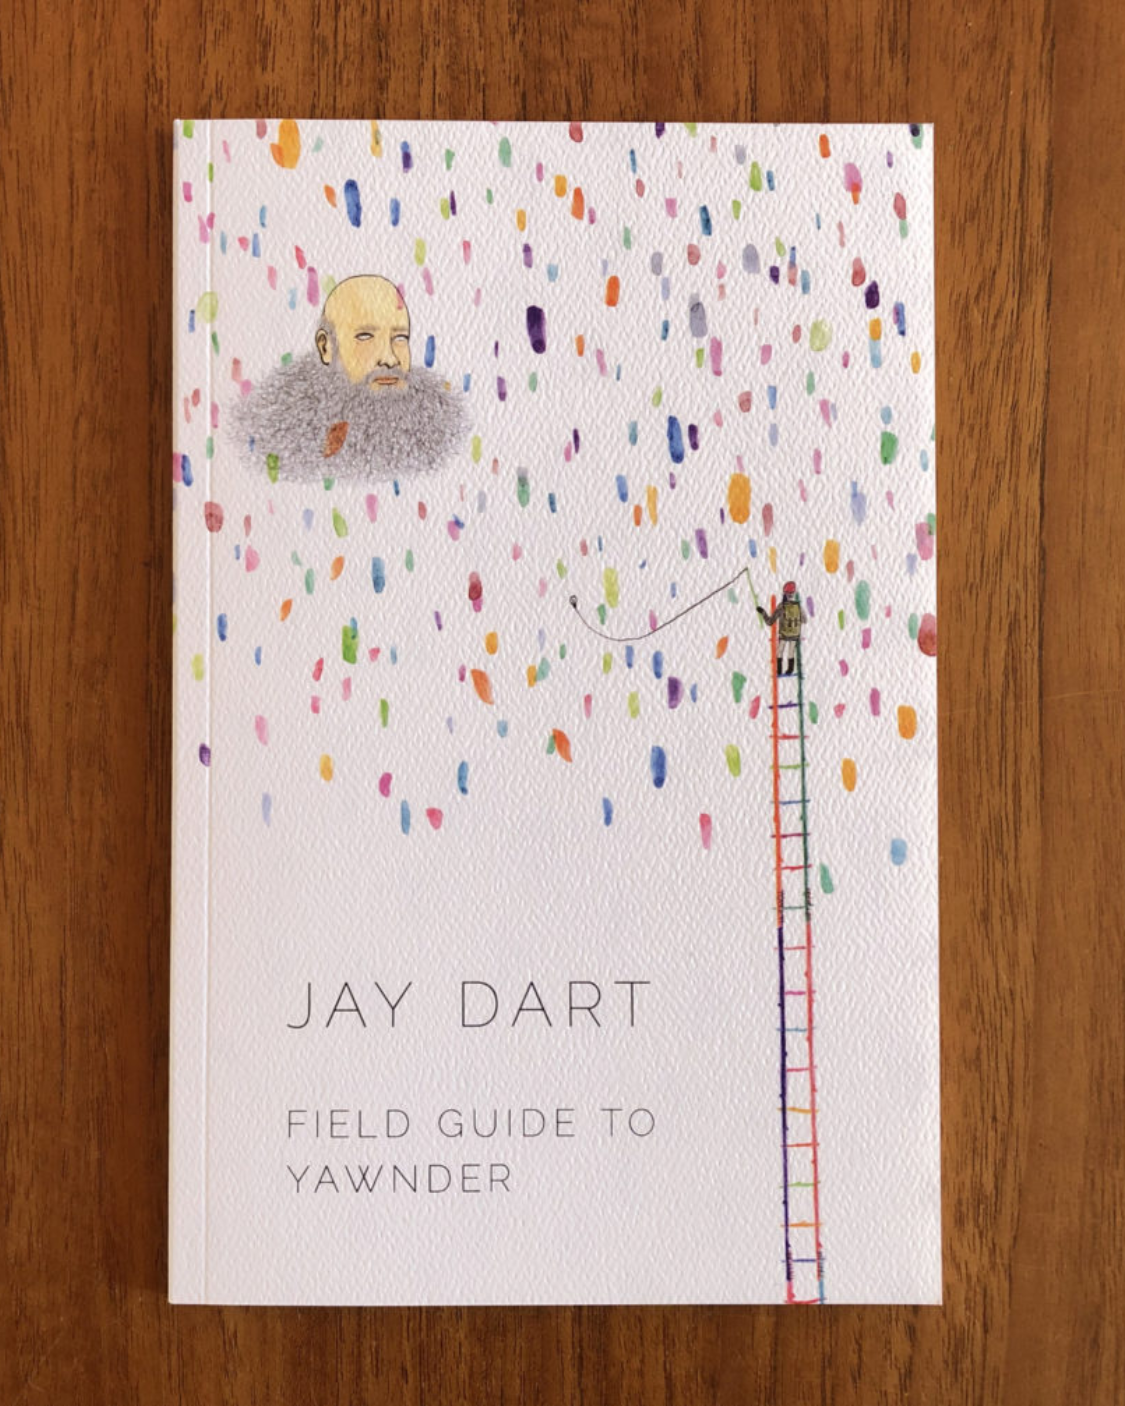 RMG Field Guide to Yawnder by Jay Dart